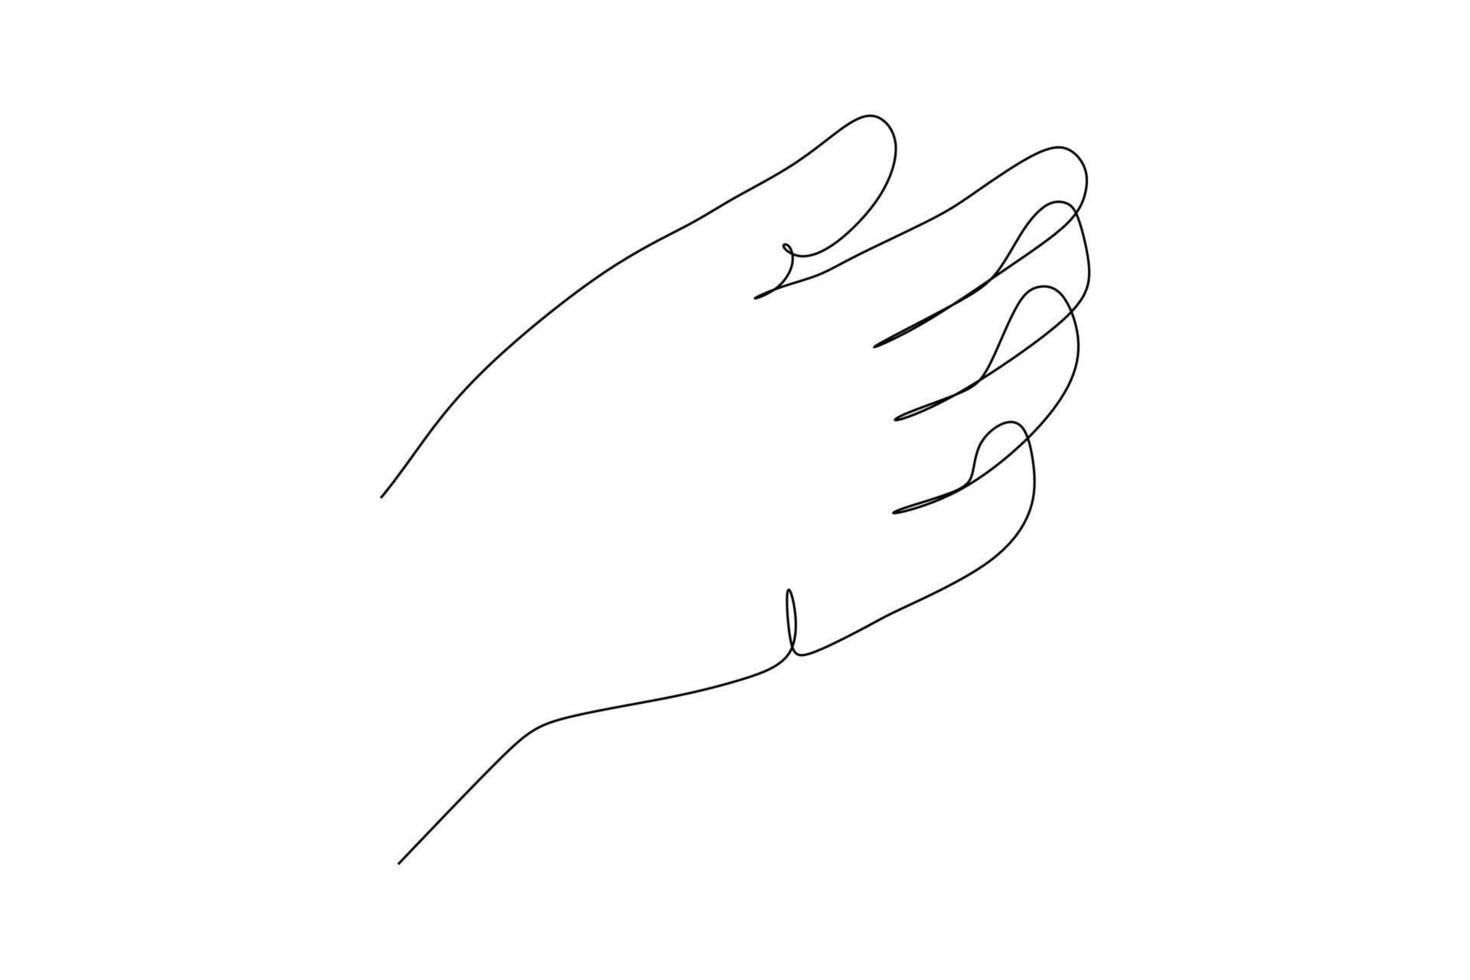 Palm gesture. Different position of the fingers. Sign and symbol of hand gestures. Single continuous drawing line. Hand drawn style art doodle isolated on white background illustration. vector